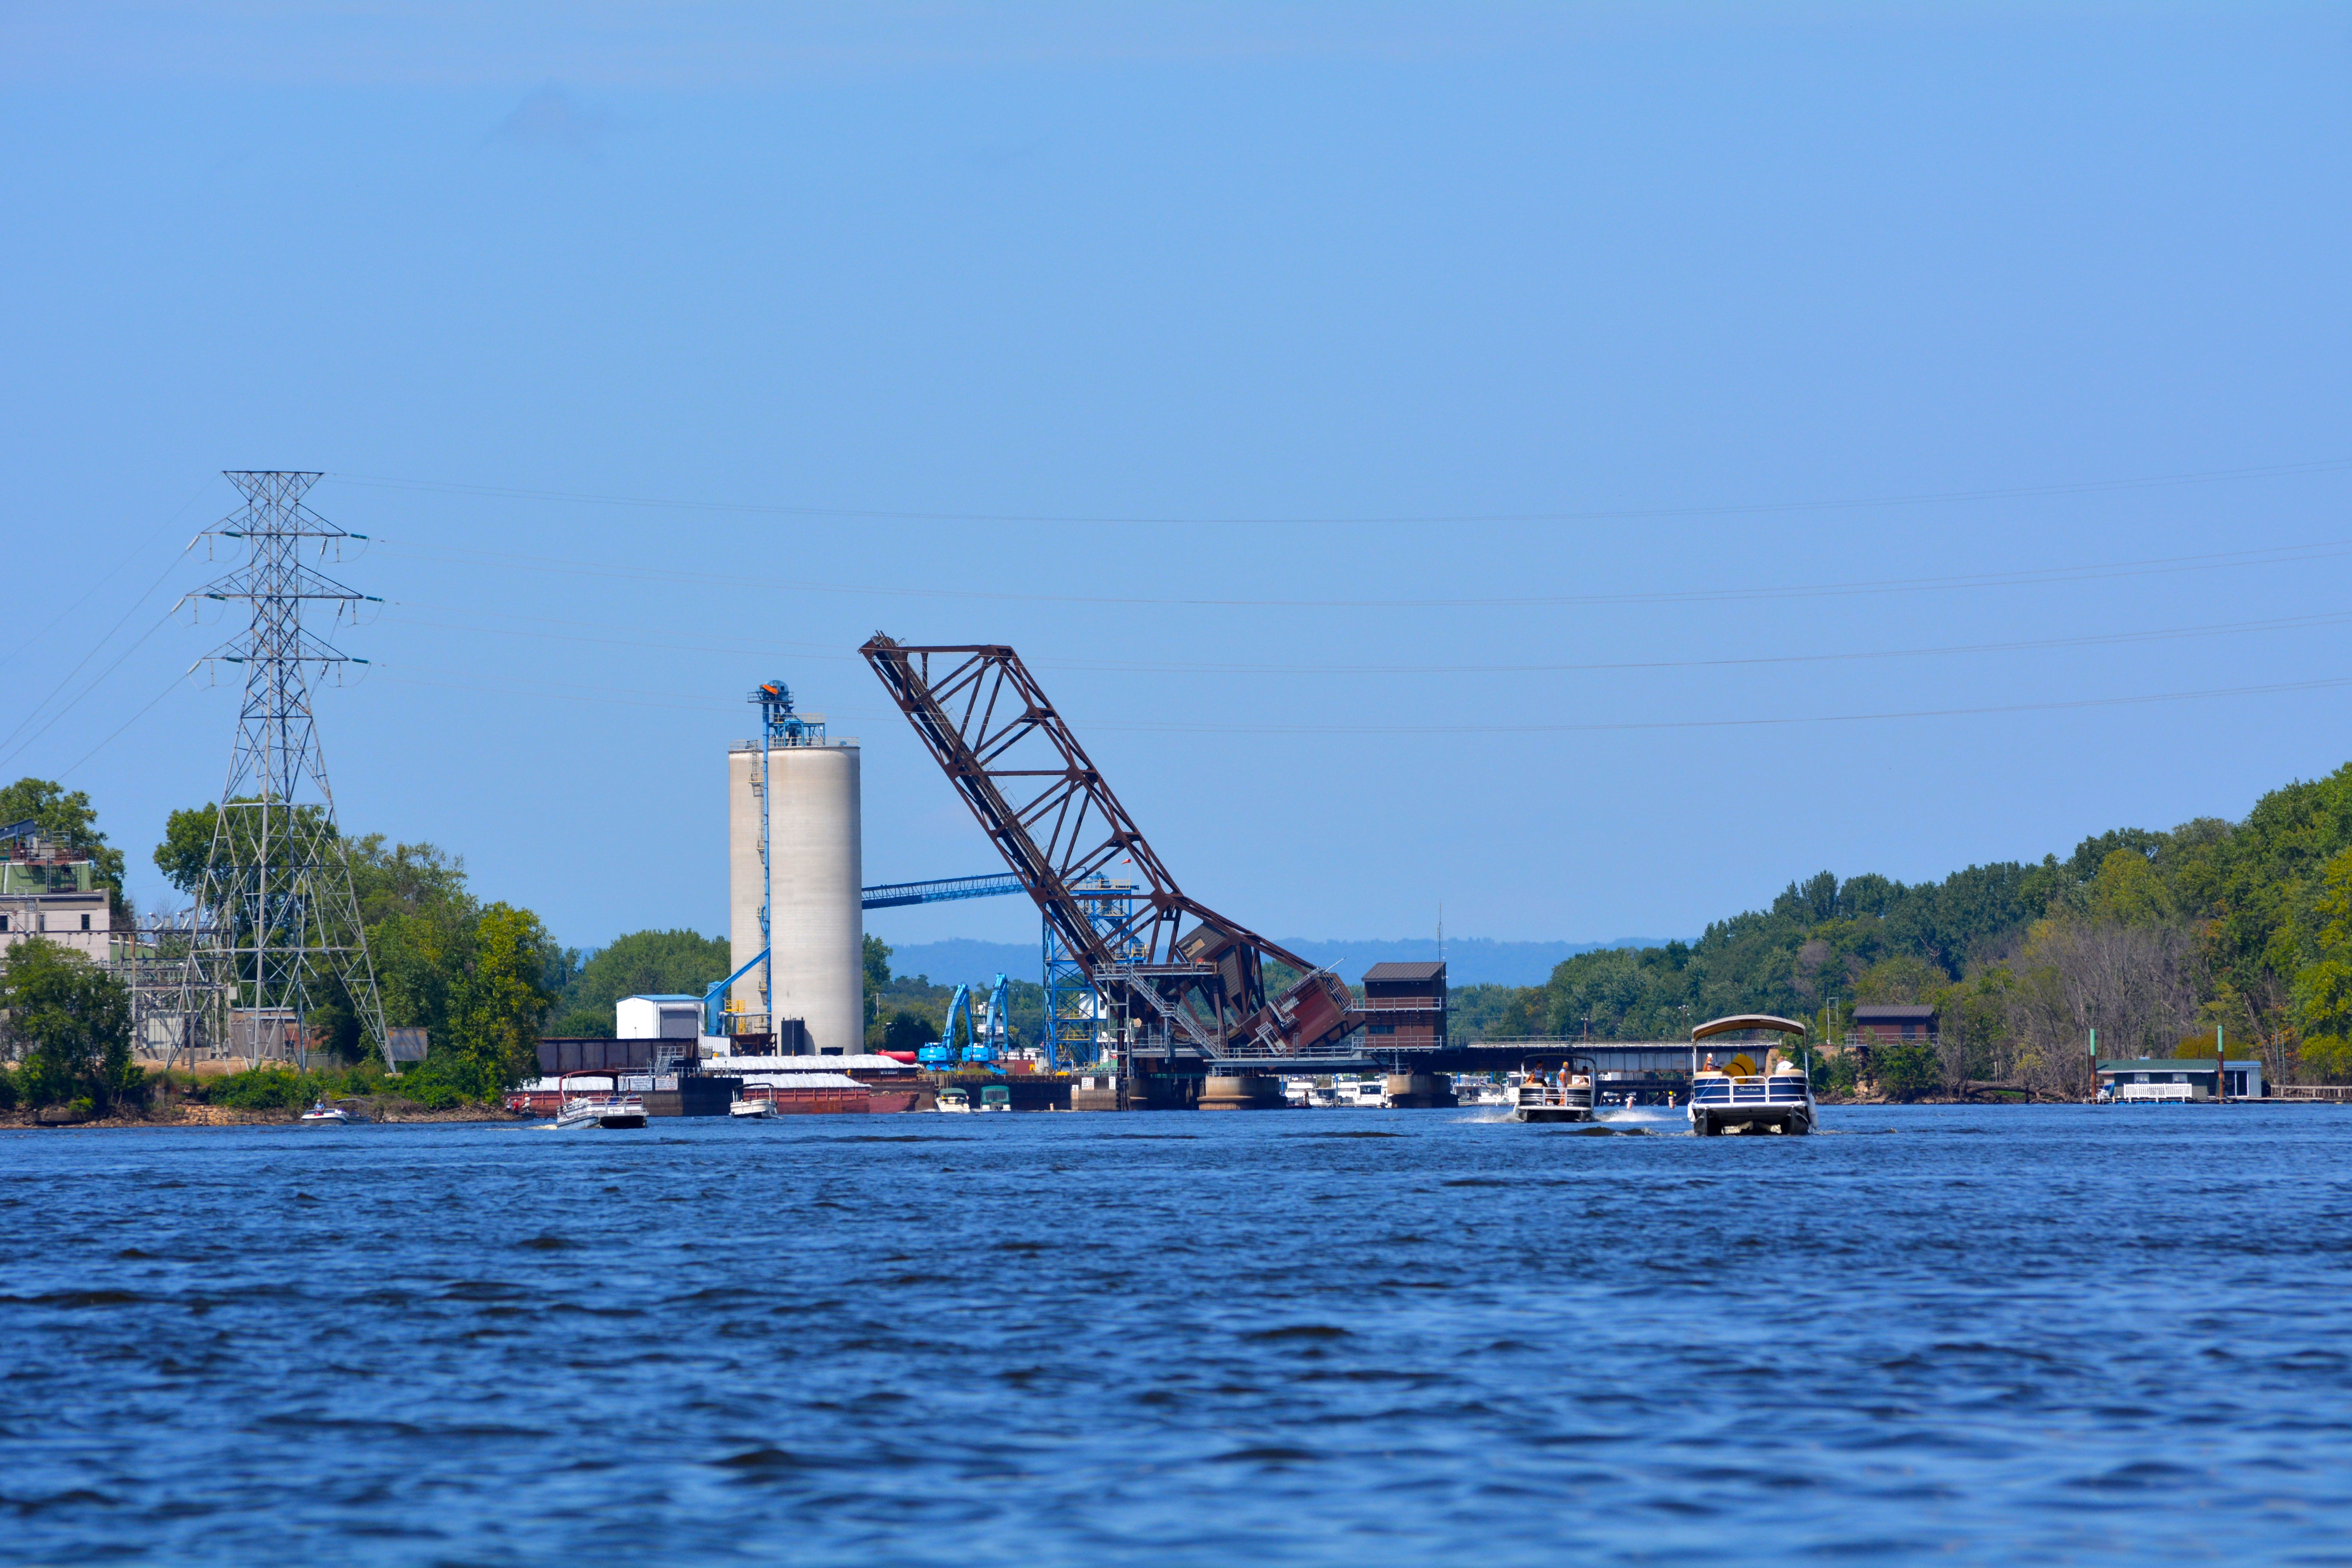 A railroad bridge rises to allow tall boats to pass underneath